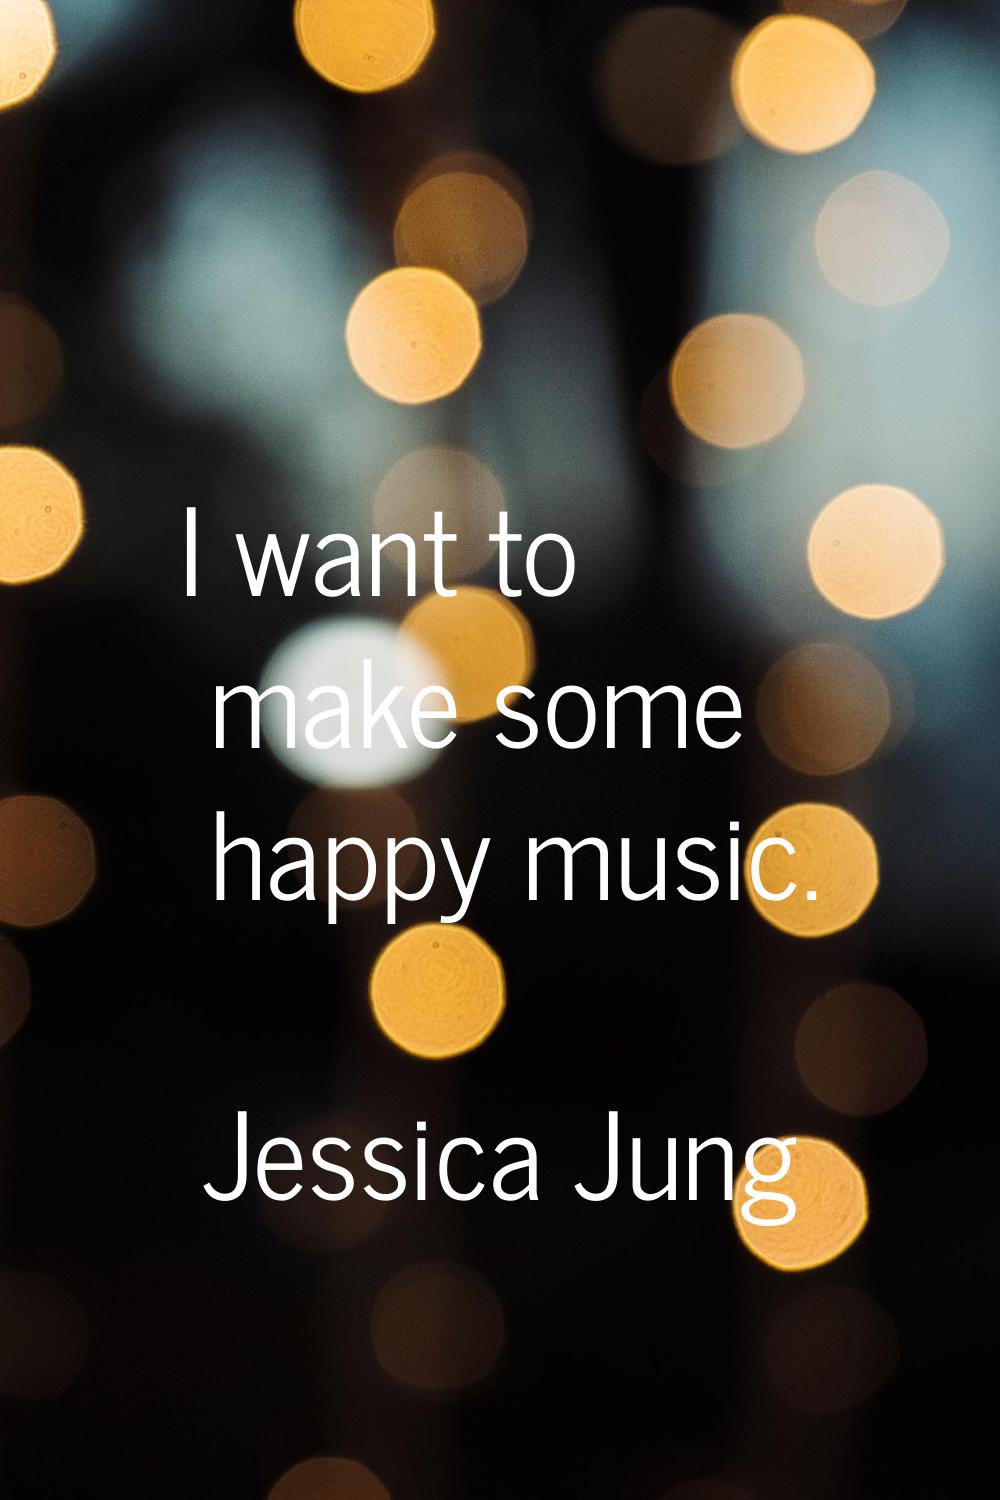 I want to make some happy music.